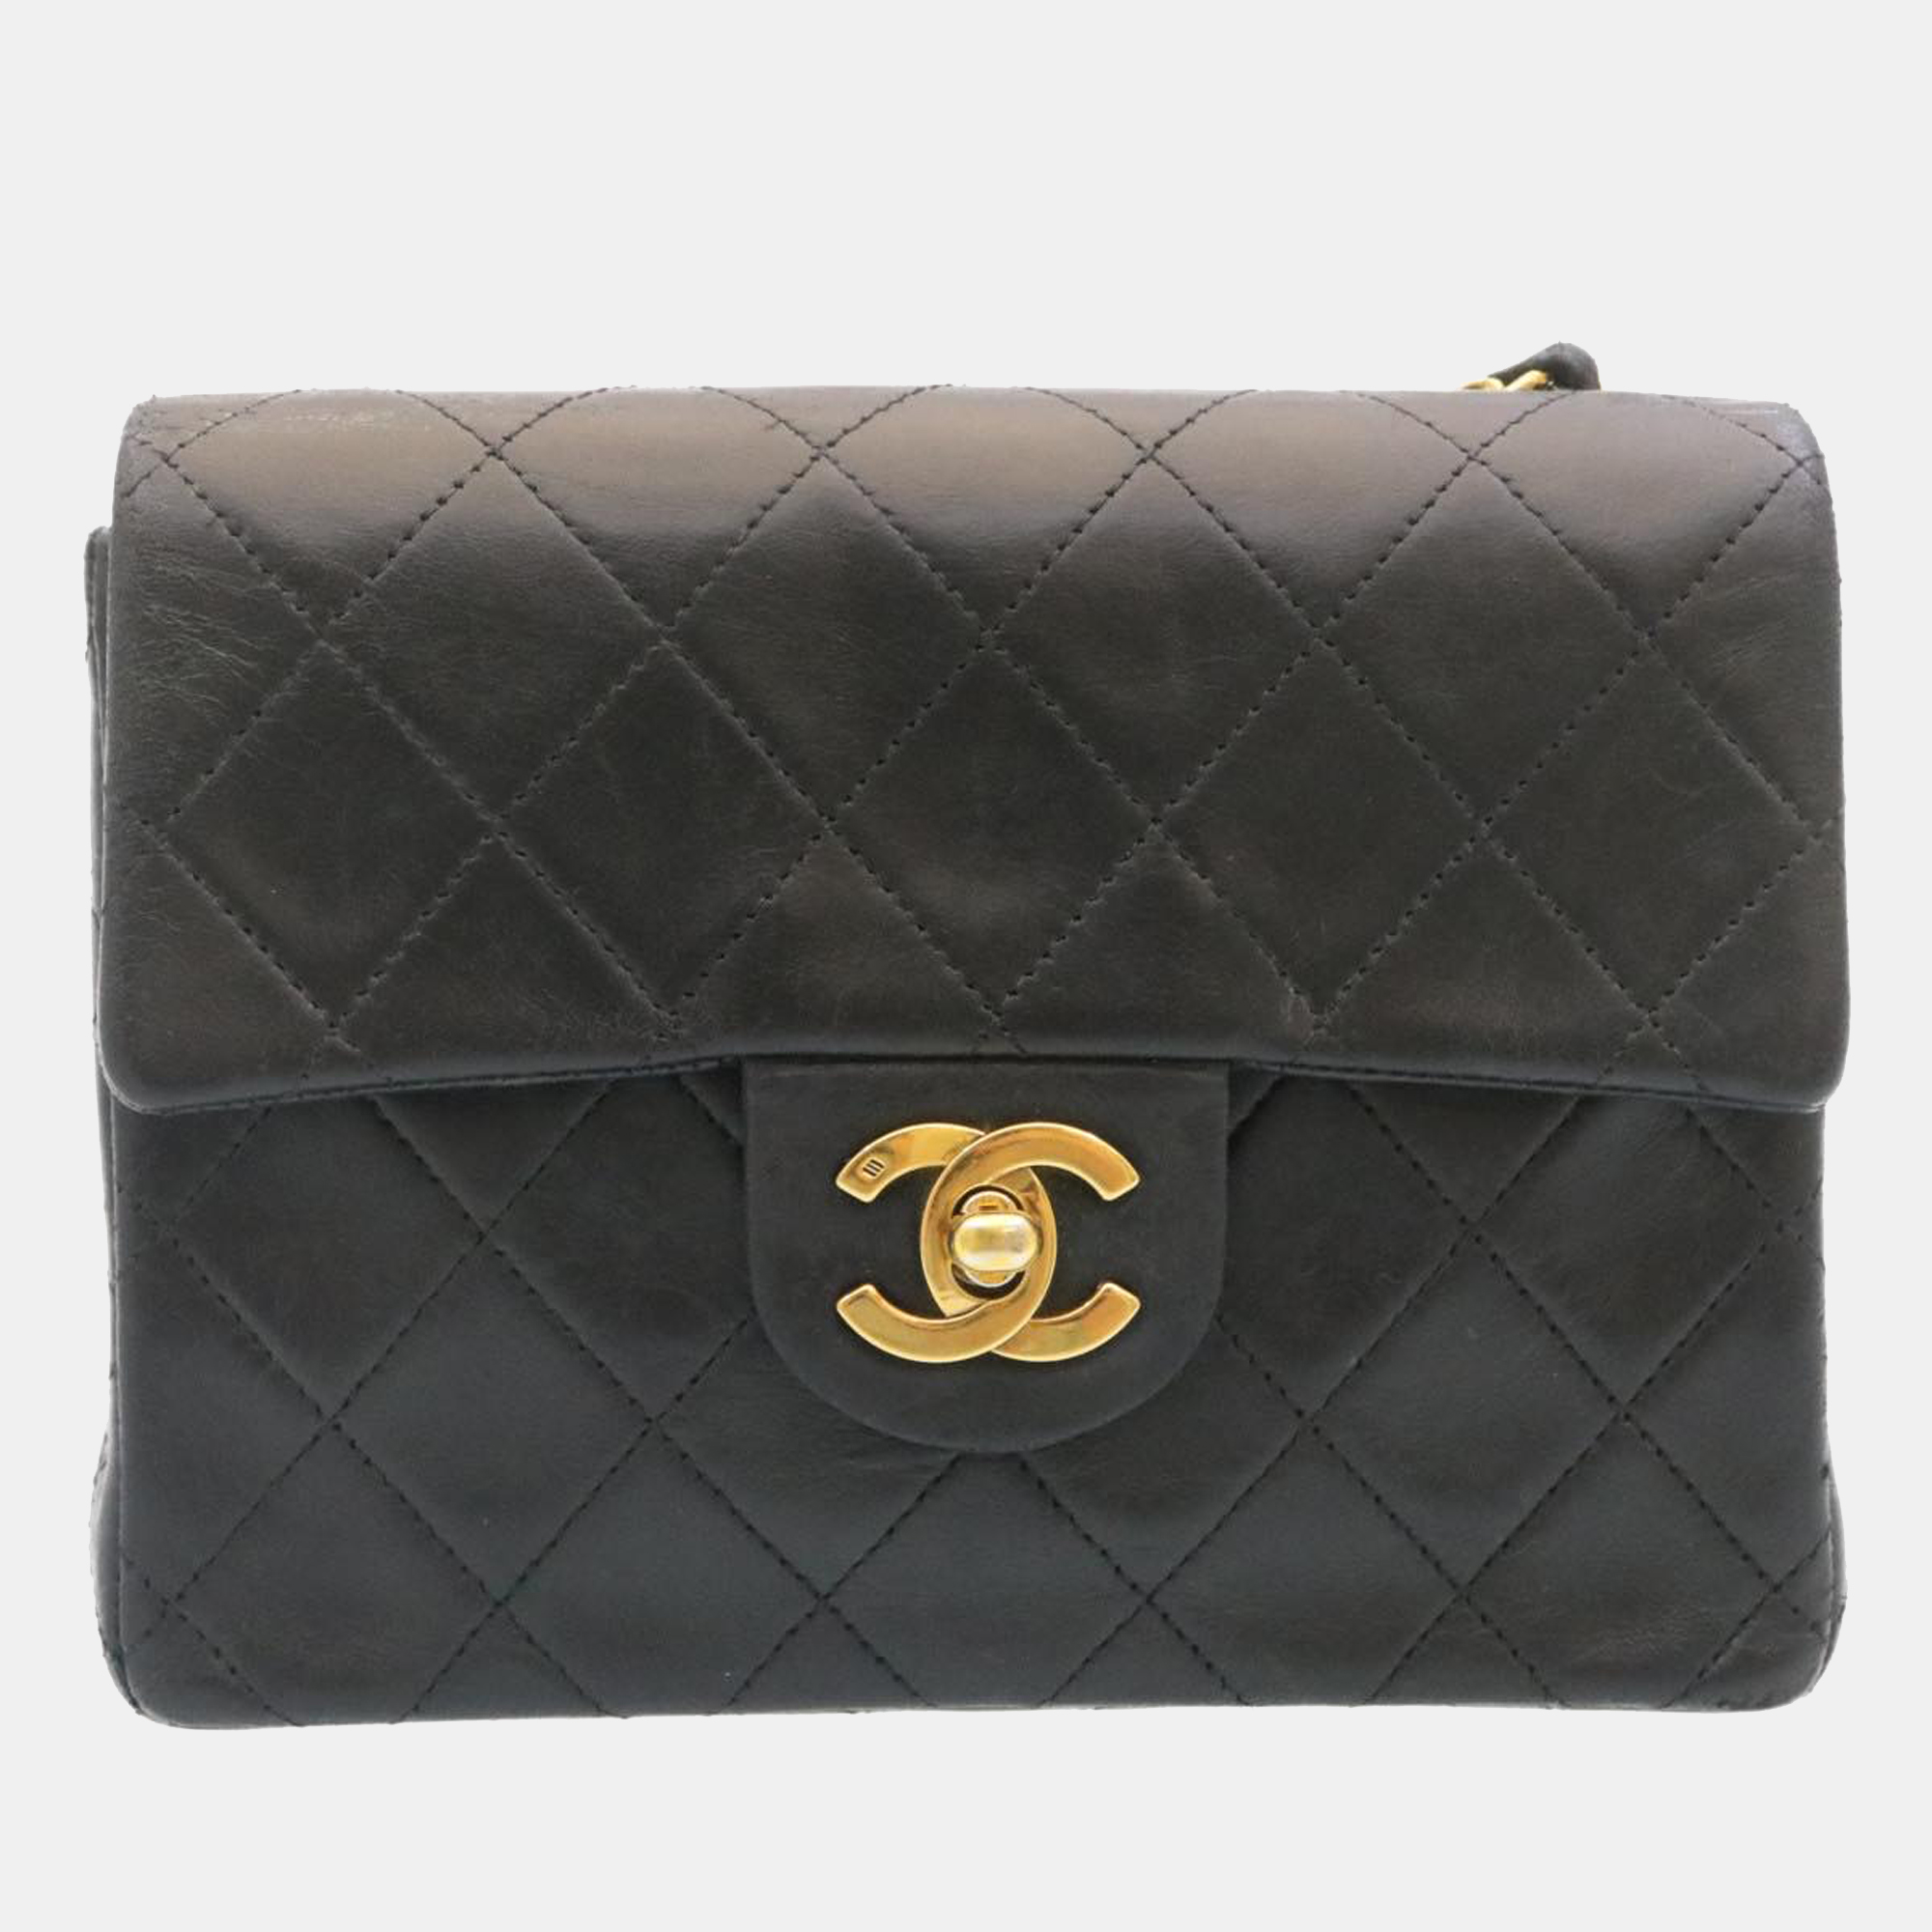 Pre-owned Chanel Black Leather Square Mini Flap Bag